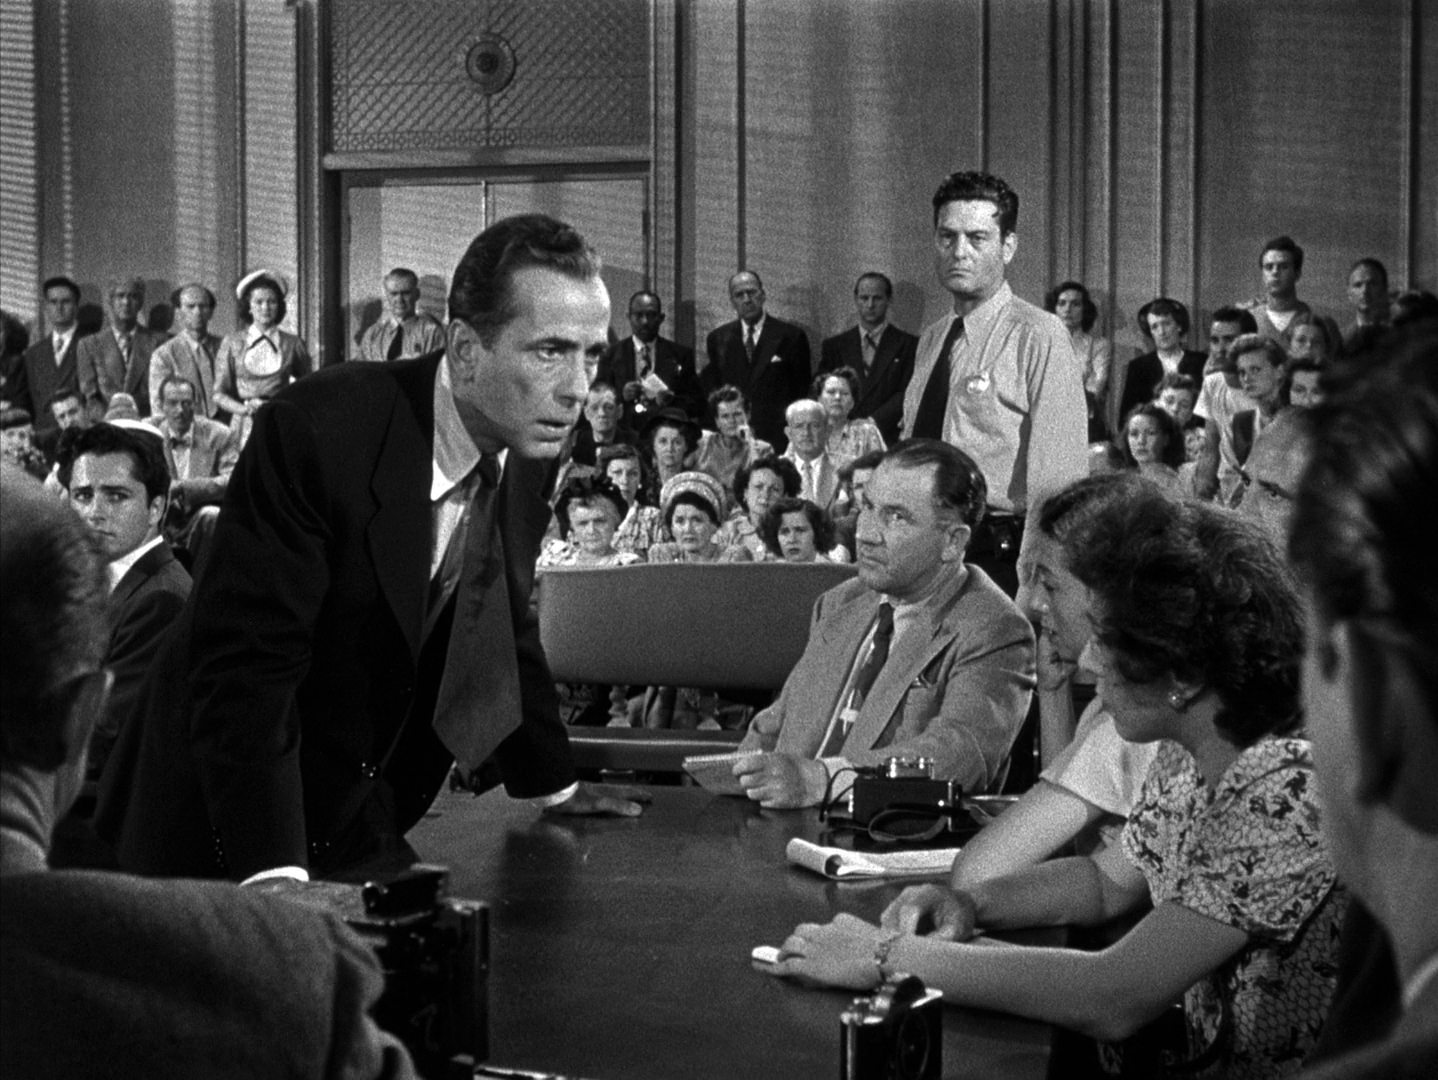 Black and white scene with Humphrey Bogart as a lawyer leaning over a desk in the courtroom during his persuasion.